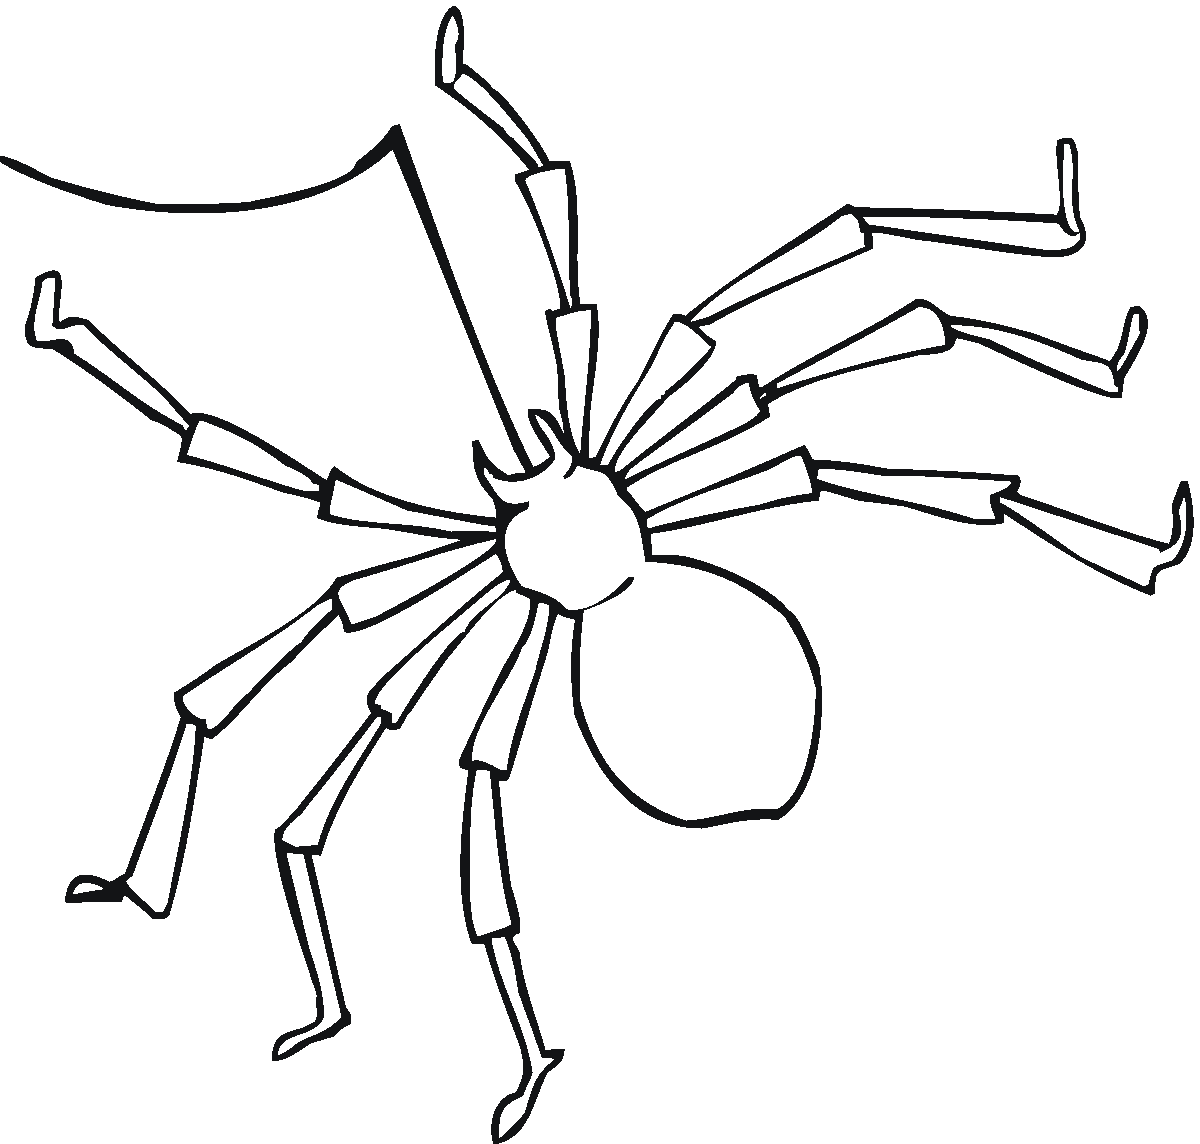 Download Free Printable Spider Coloring Pages For Kids